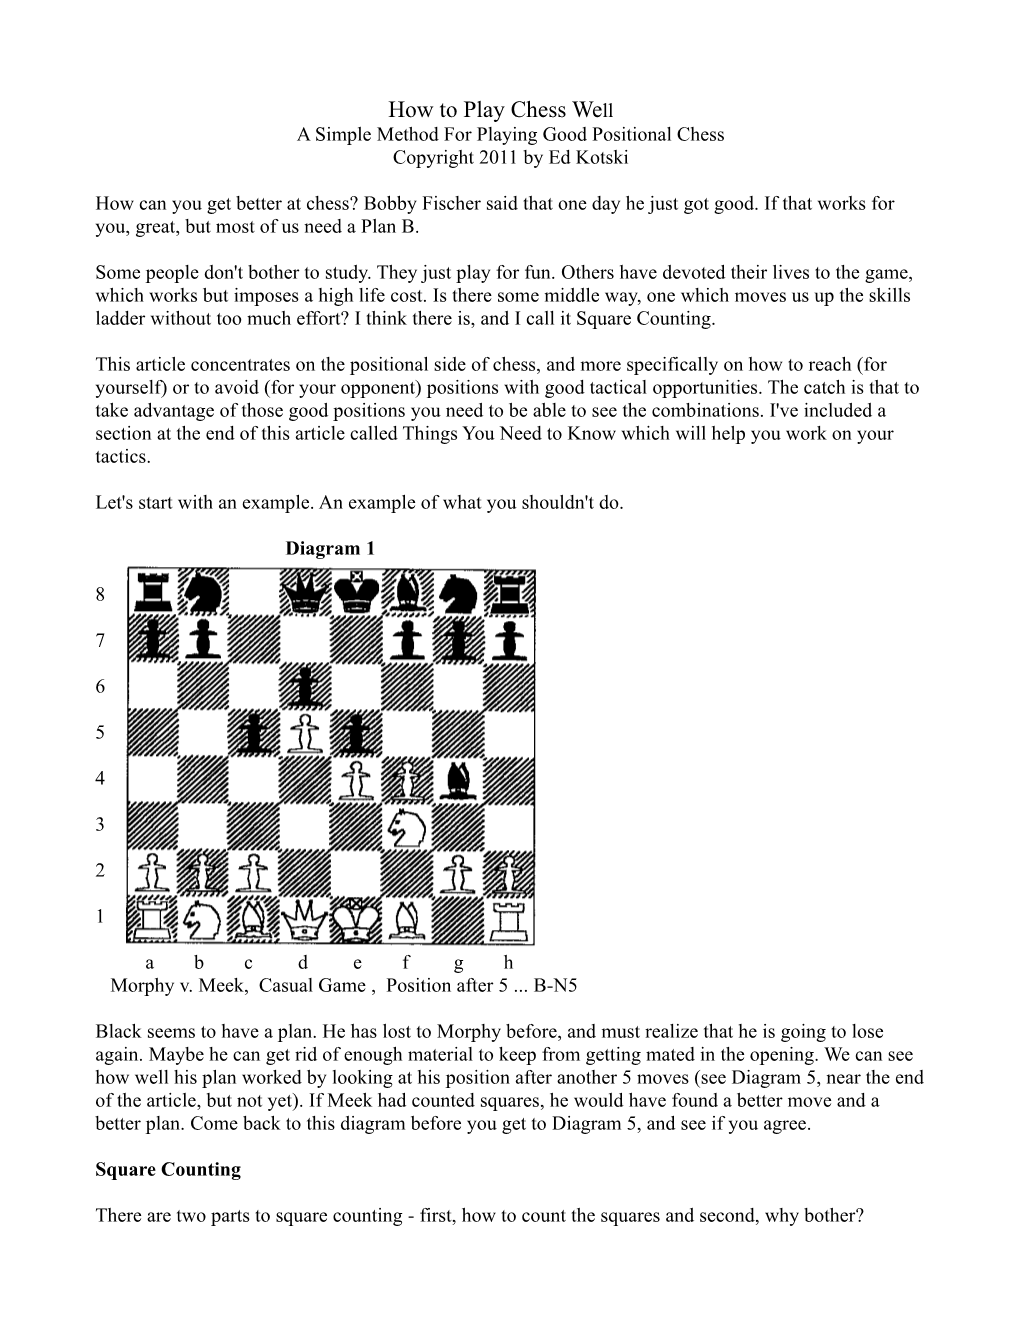 How to Play Chess Well a Simple Method for Playing Good Positional Chess Copyright 2011 by Ed Kotski